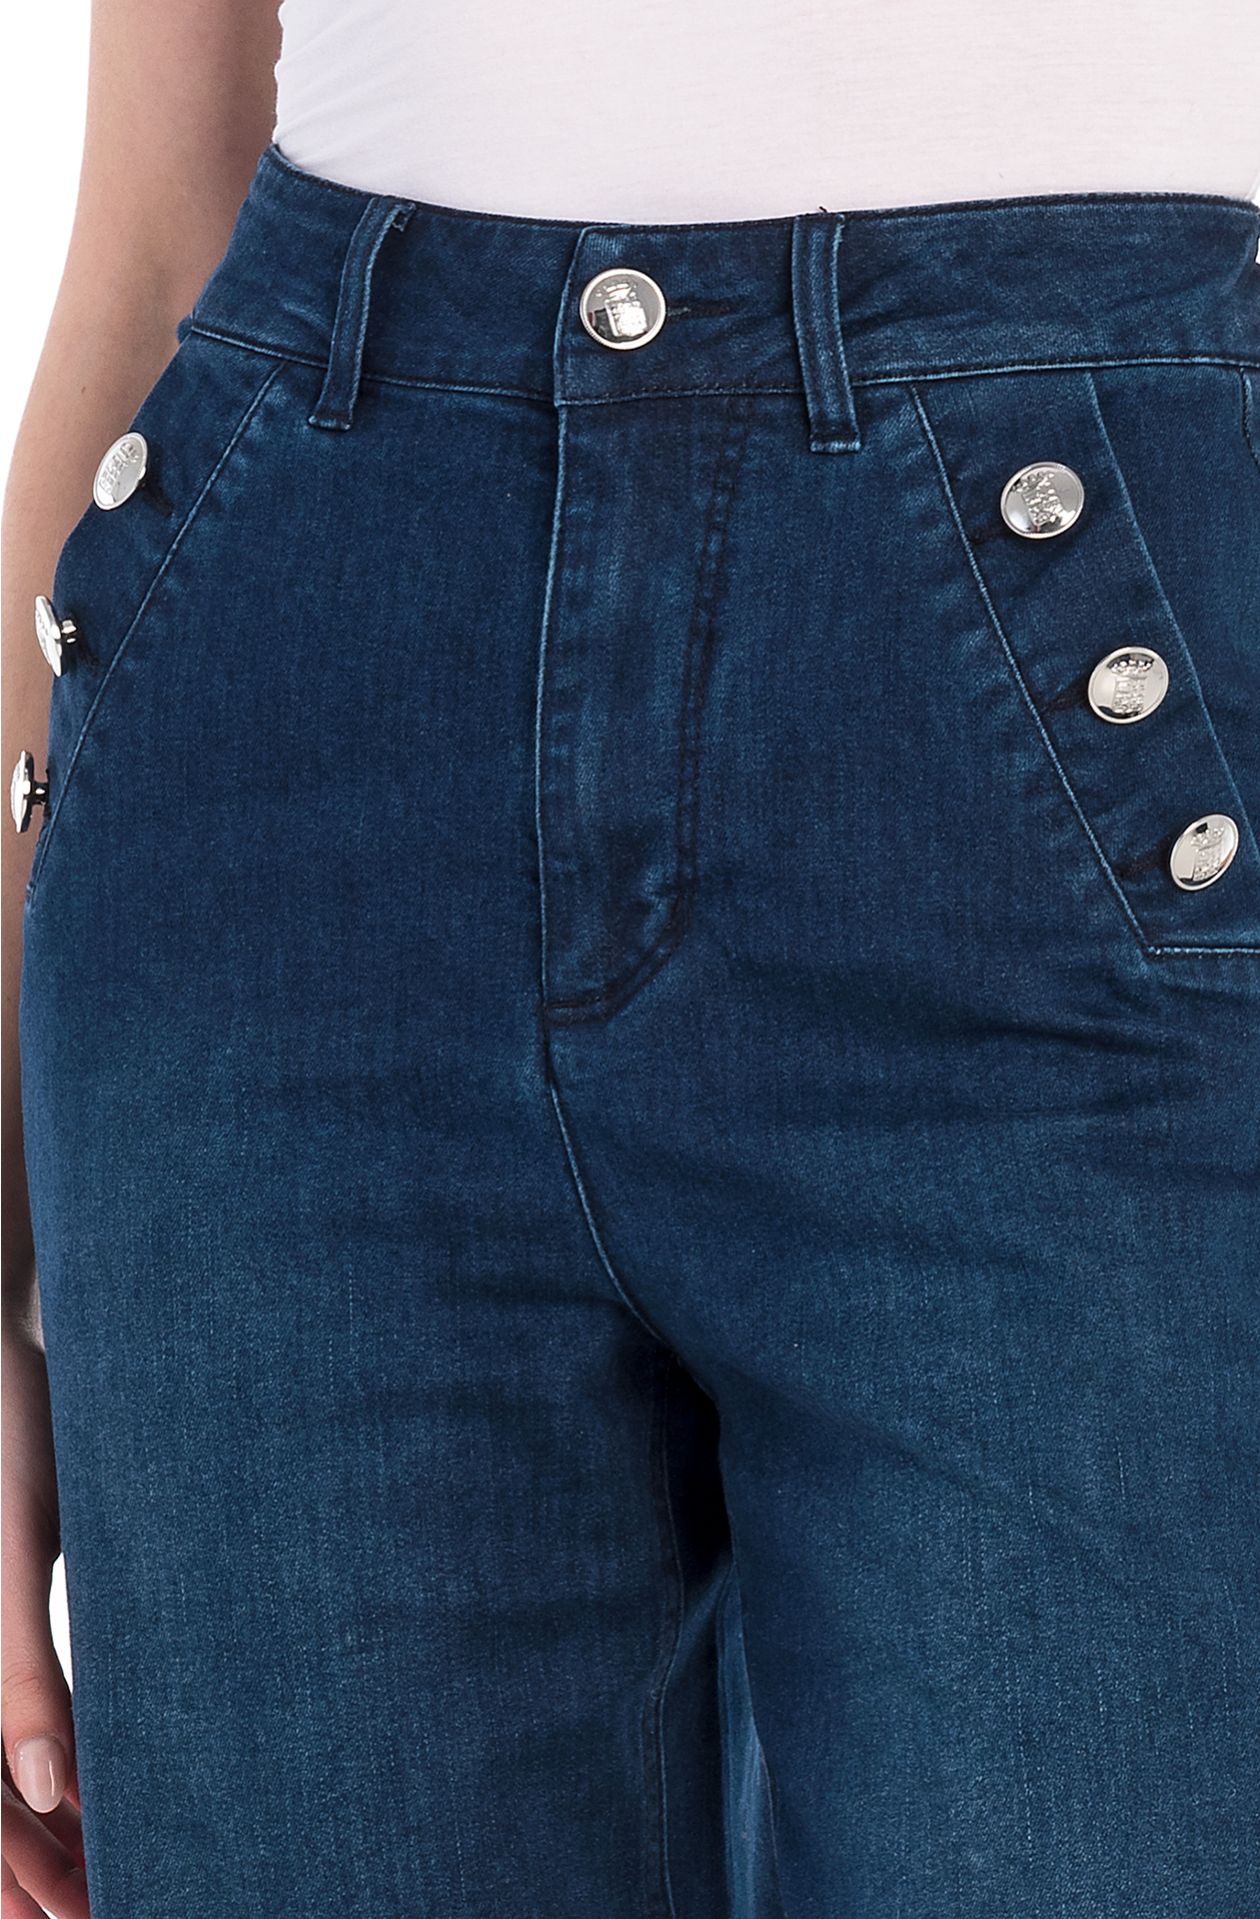 Jeans with metal buttons